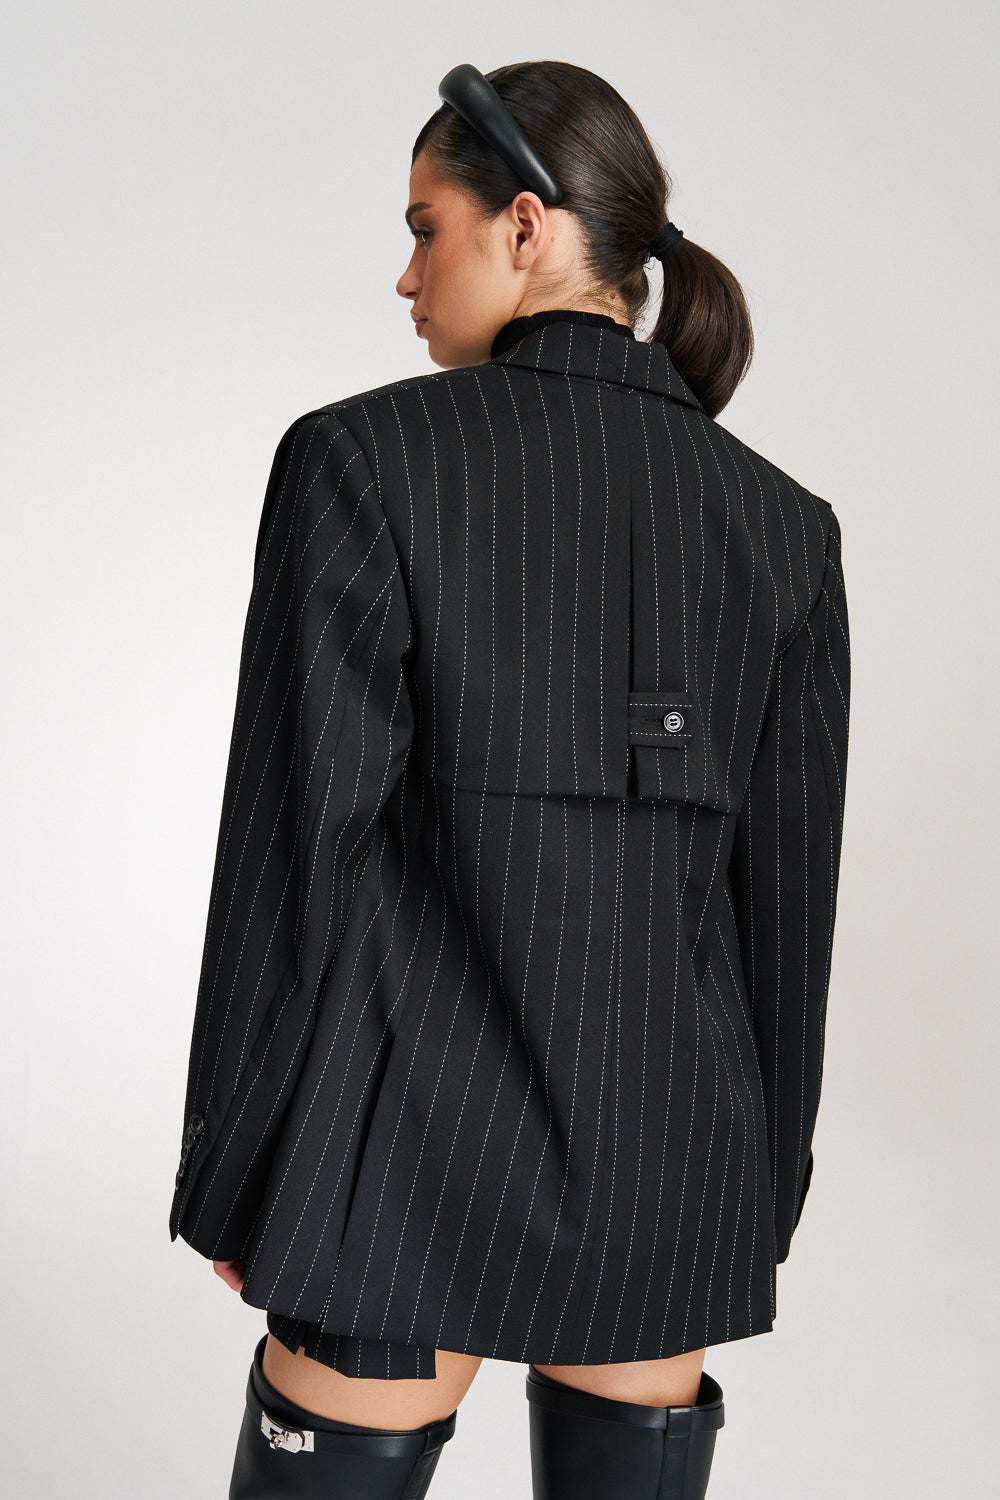 ‘Ava‘ Pinstriped Double-Breasted Crepe Blazer